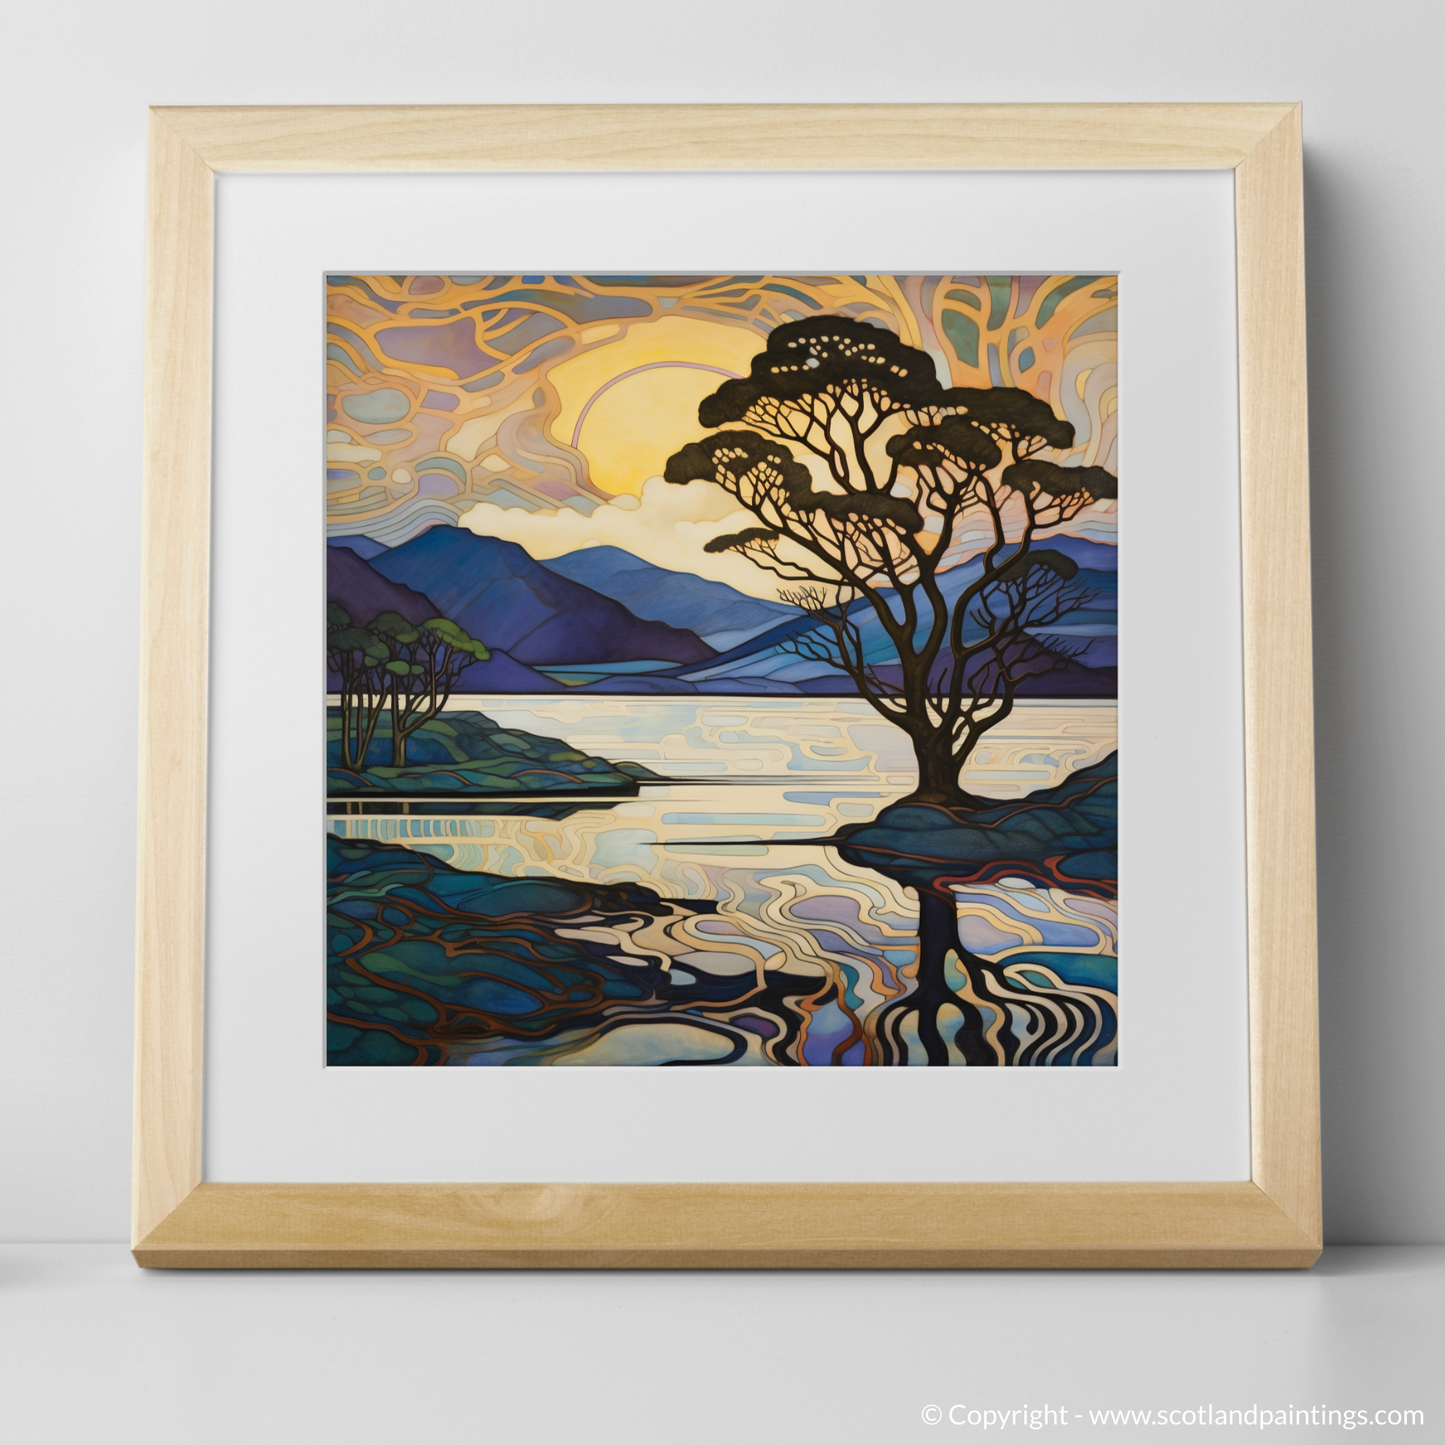 Art Print of Loch Lomond with a natural frame